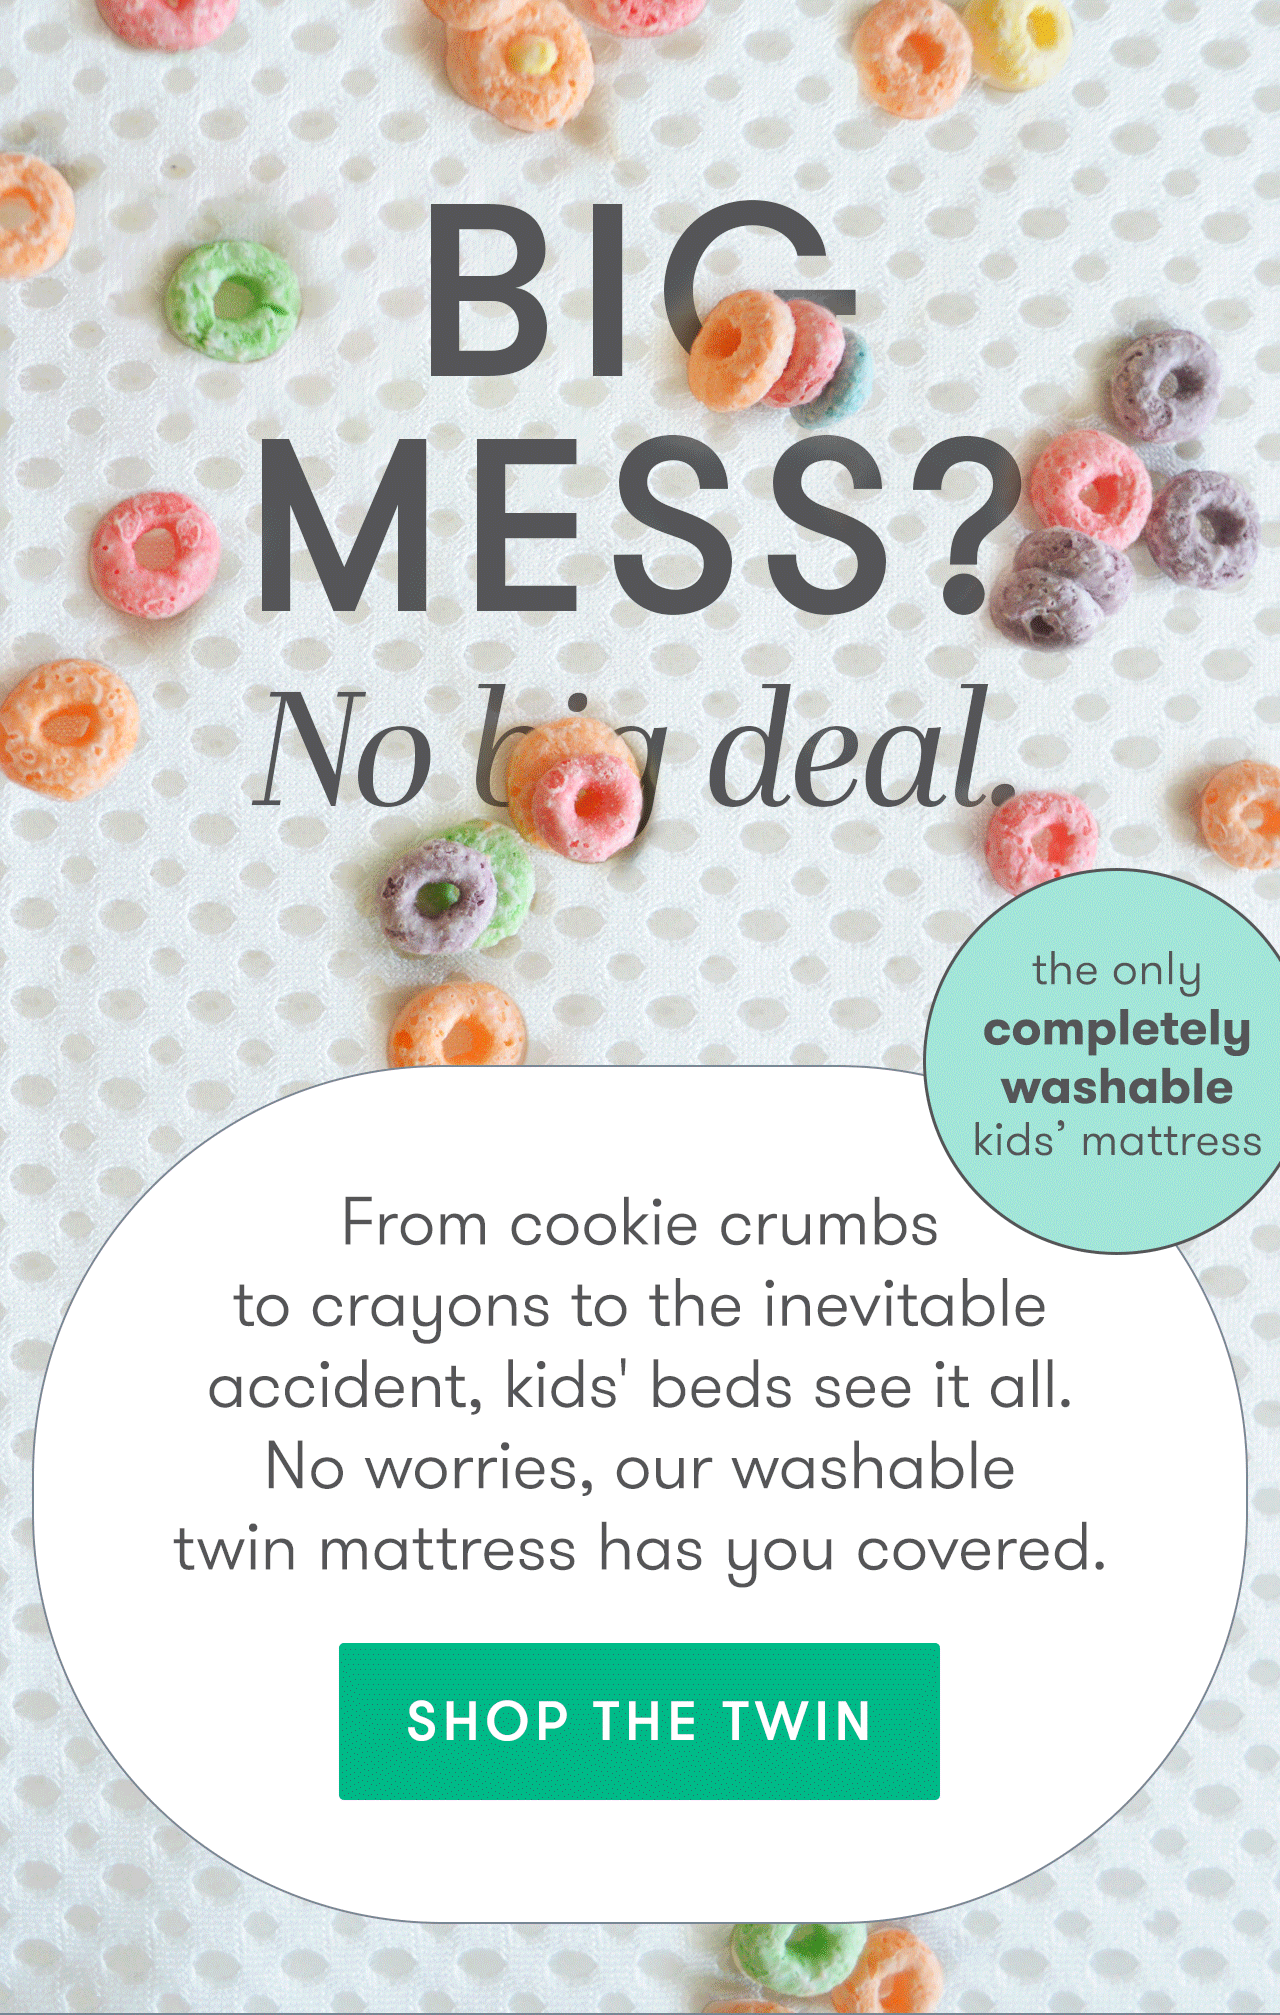 Big messes? No big deal with the ONLY completely washable kids' twin mattress.